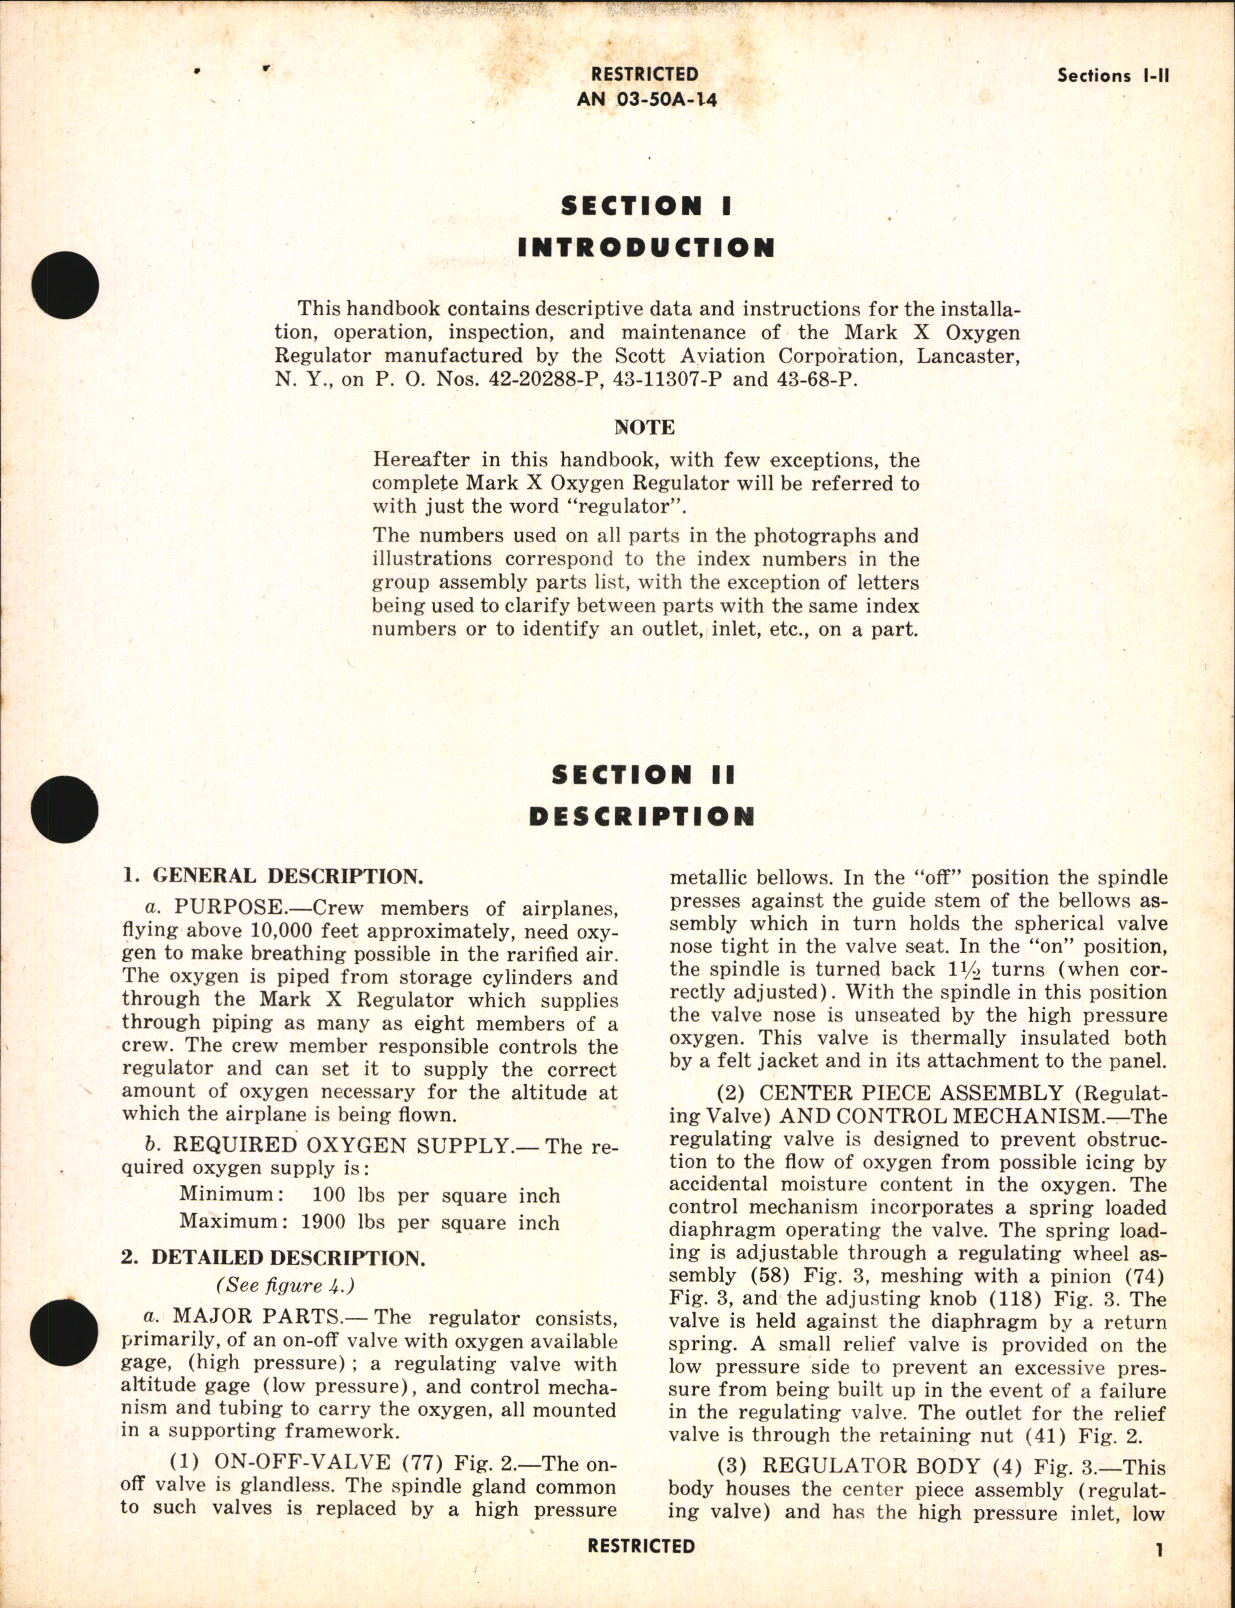 Sample page 5 from AirCorps Library document: Handbook of Instructions with Parts Catalog for Mark X Oxygen Regulator 